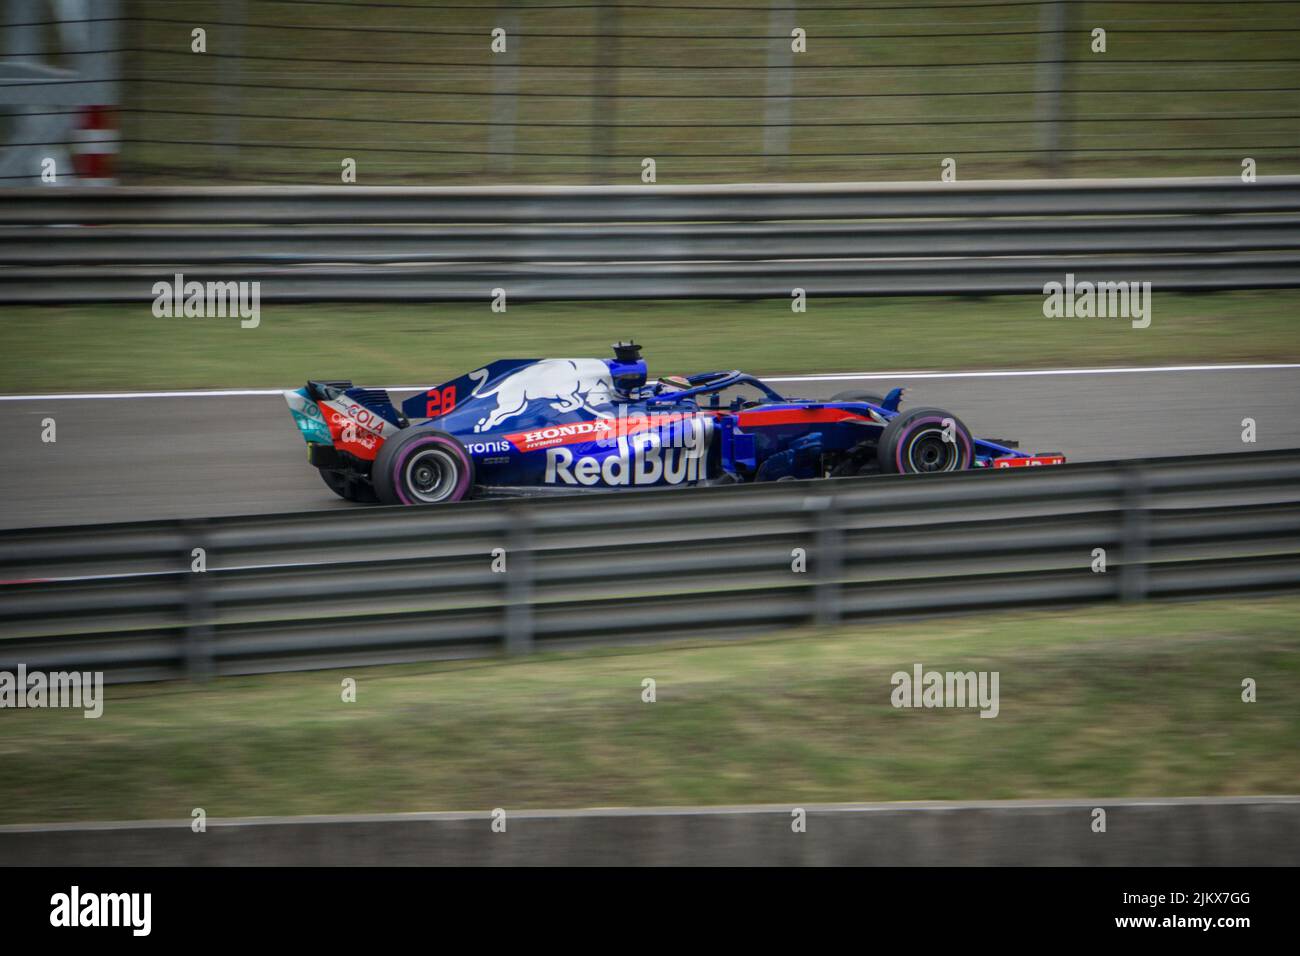 The 2018 Toro Rosso F1 car in China between turns 15 and 16 Stock Photo